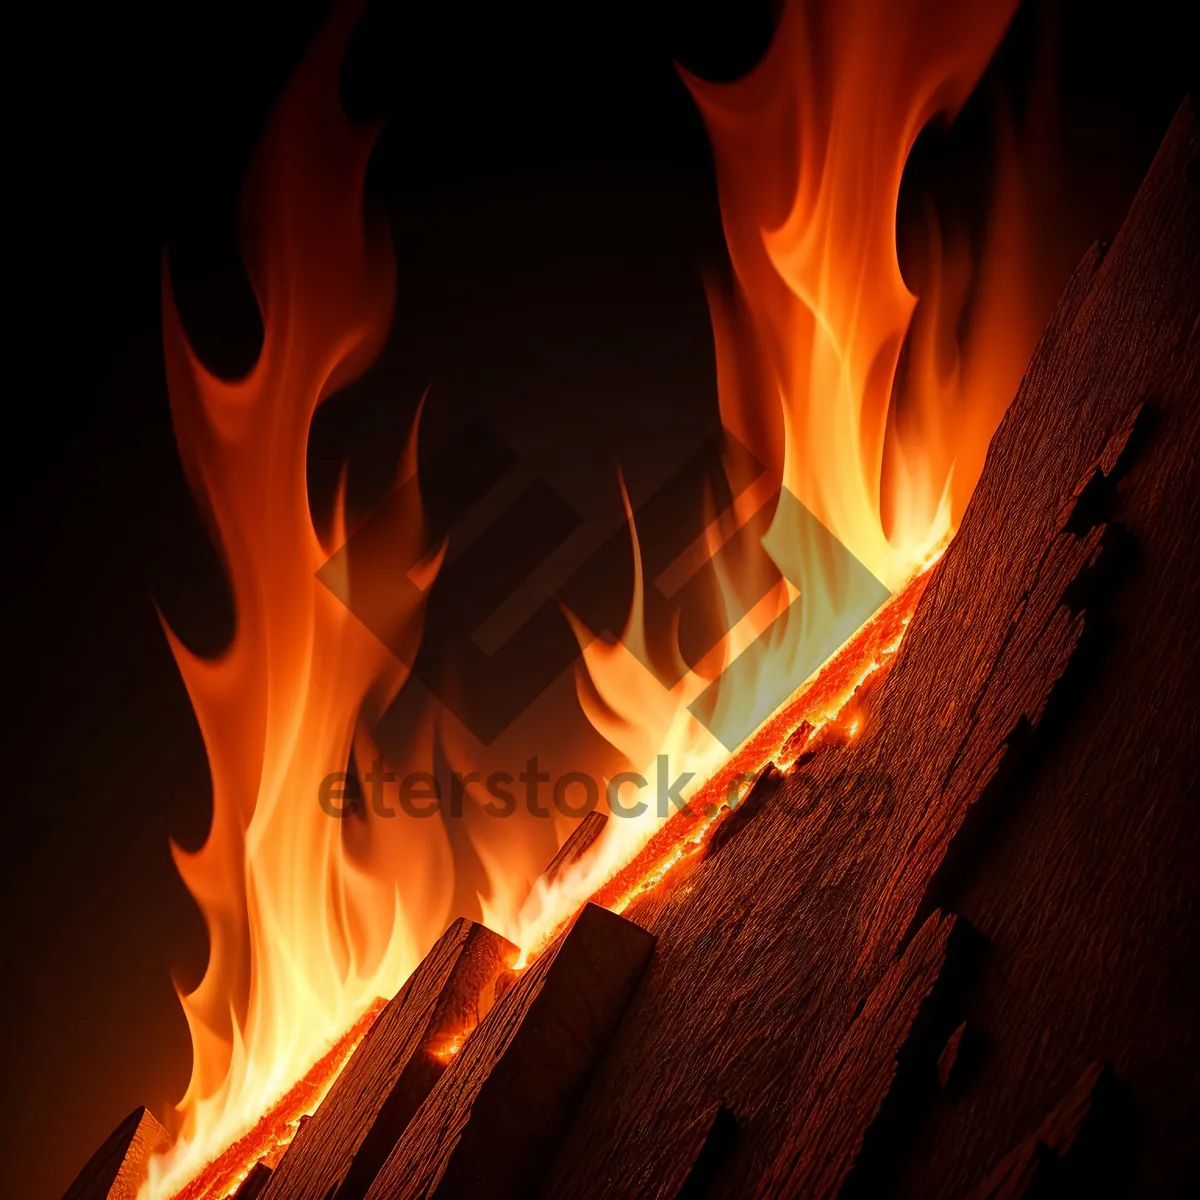 Picture of Fiery Blaze: Combustion in Motion